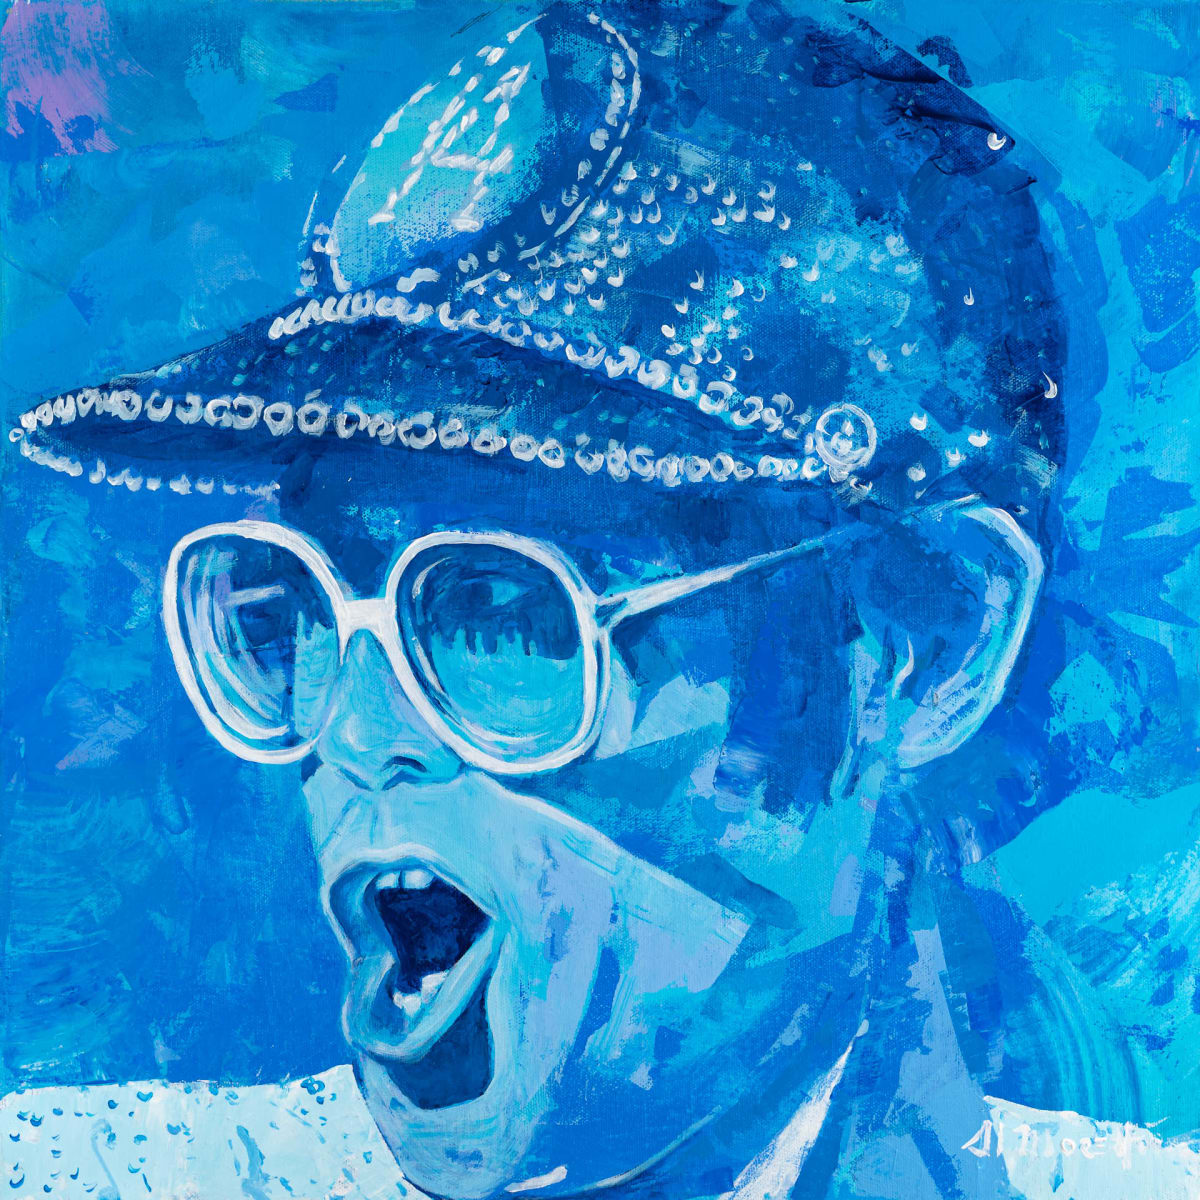 Elton John, "That's Why They Call it the Blues" by Al Moretti 